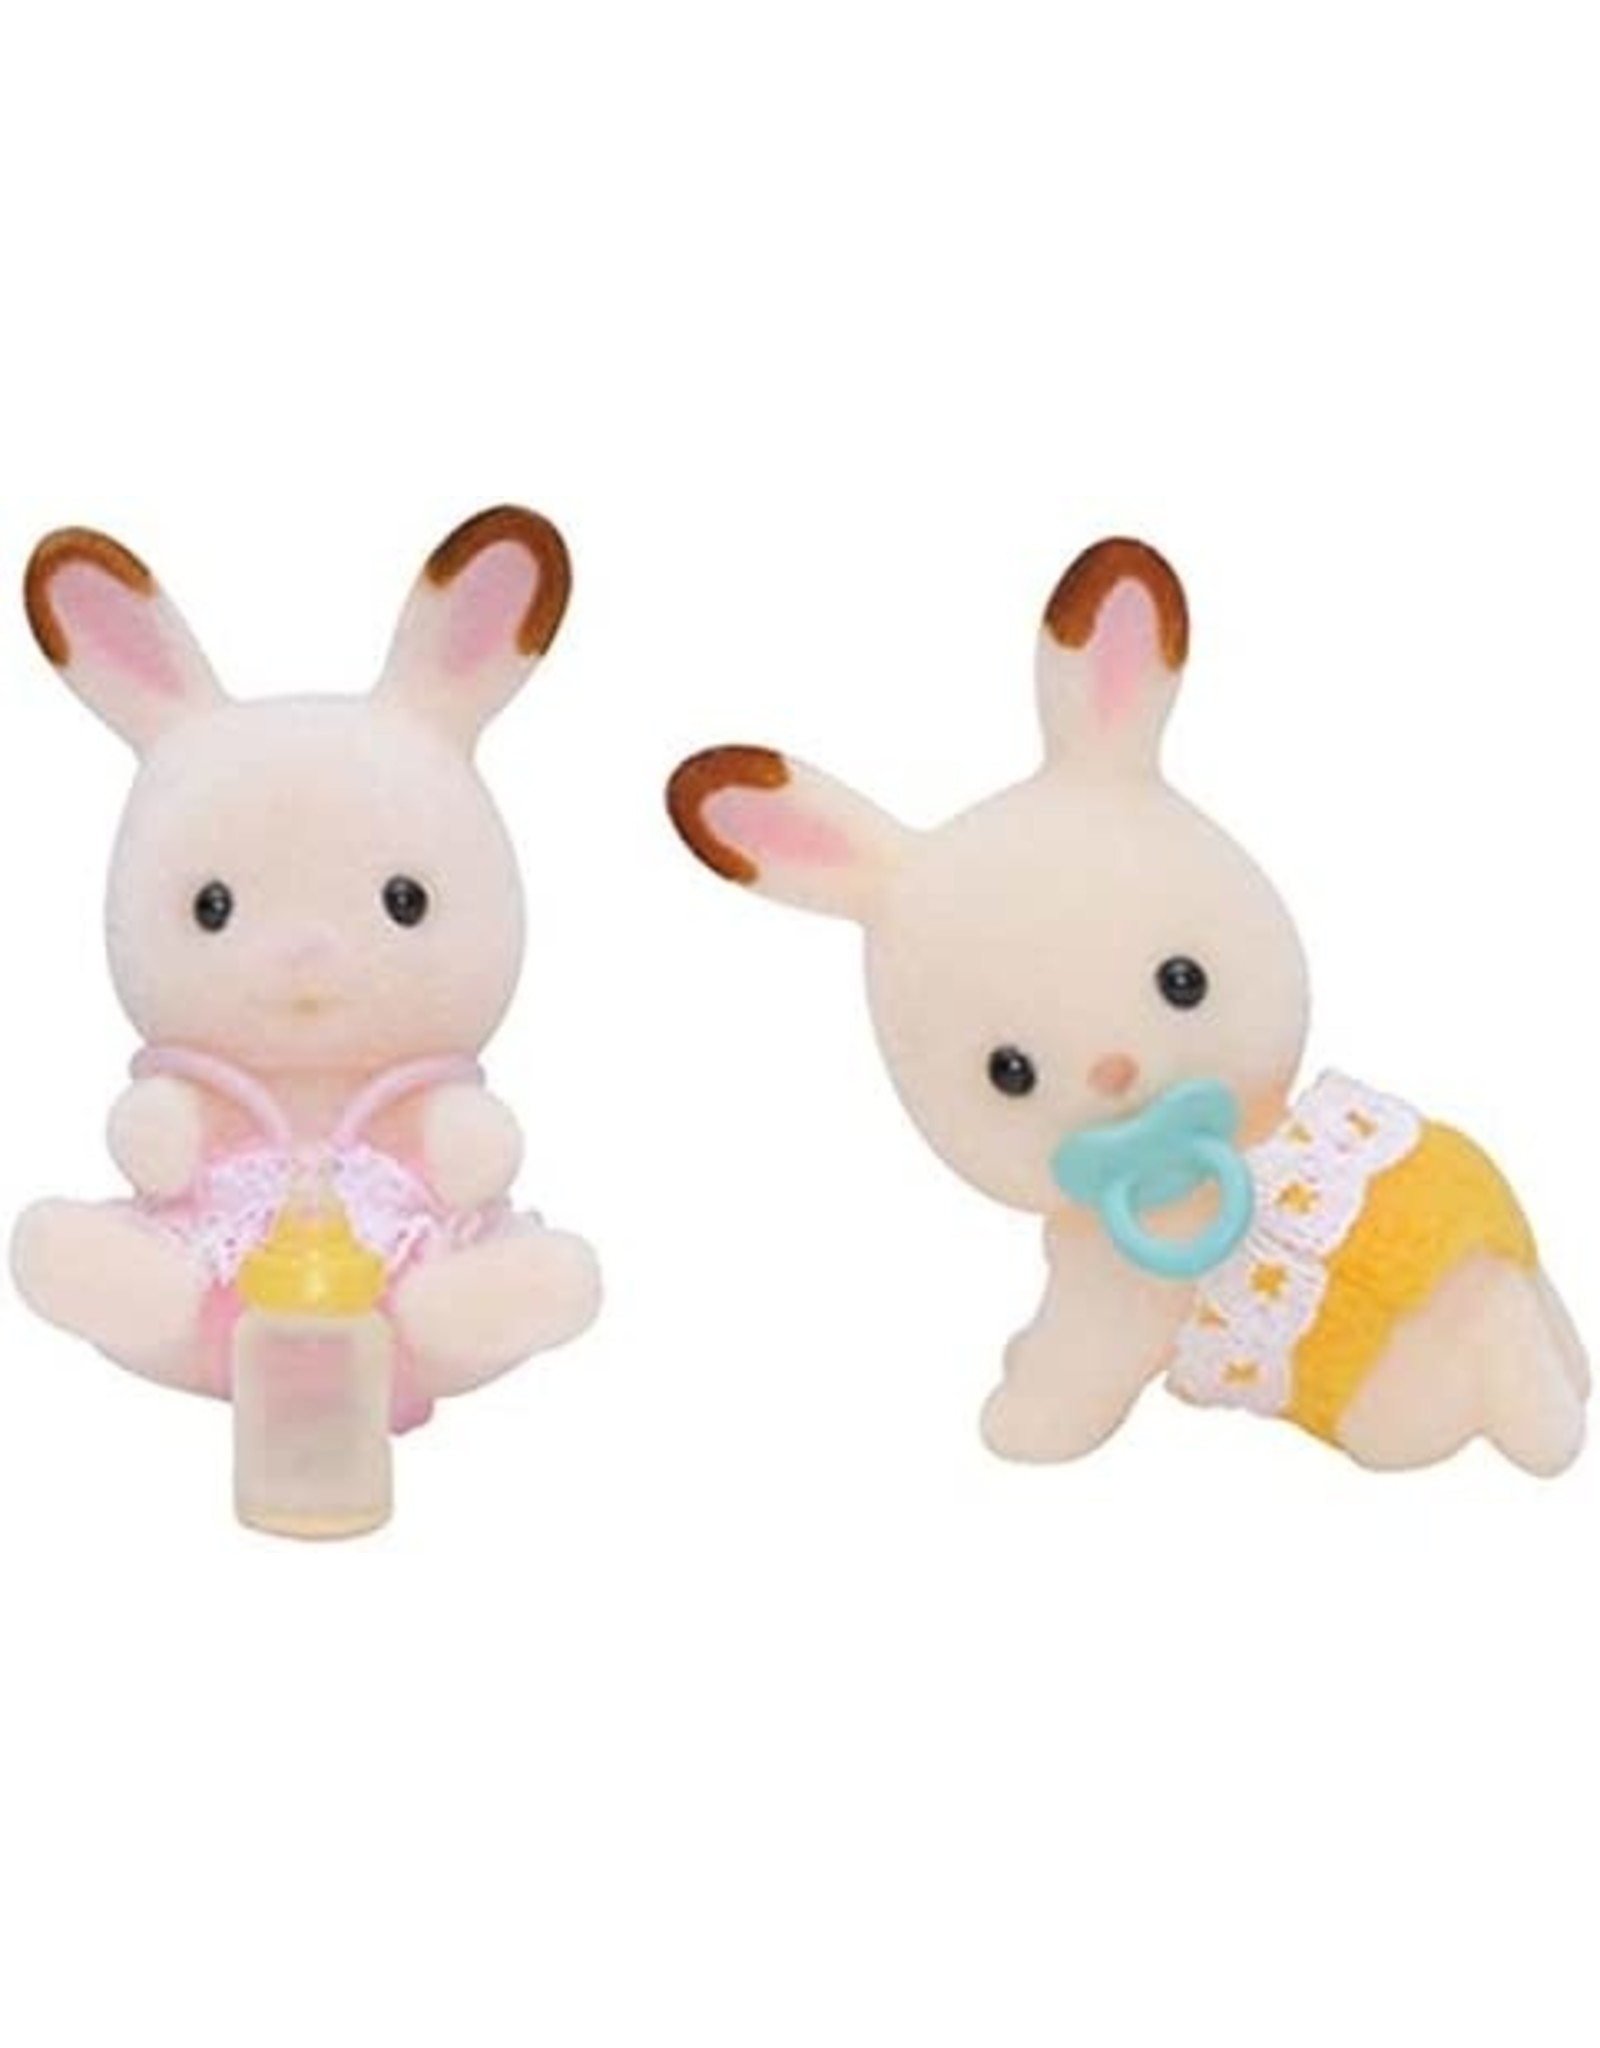 Calico Critters Calico Critters Chocolate Rabbit Twins